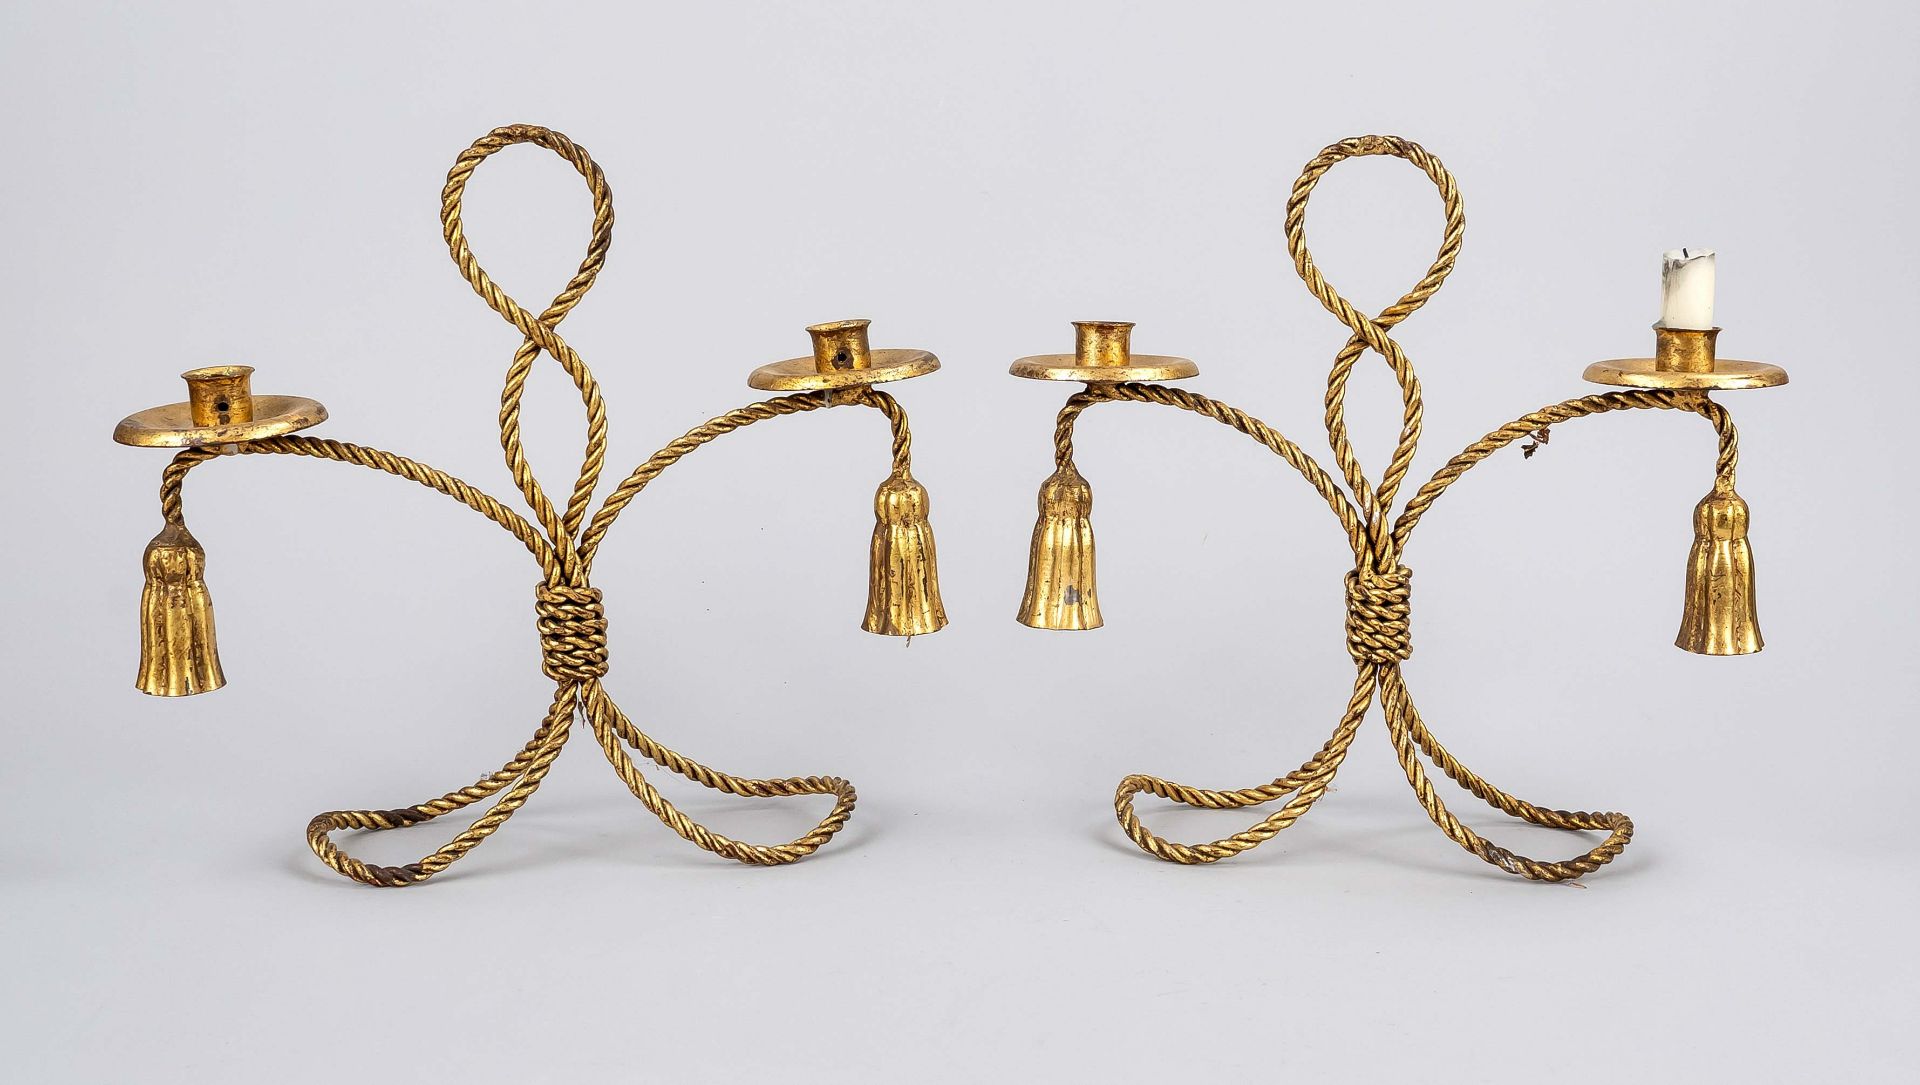 Pair of cord candlesticks, late 19th century, metal with residual gilding. Tassels at the ends, 2